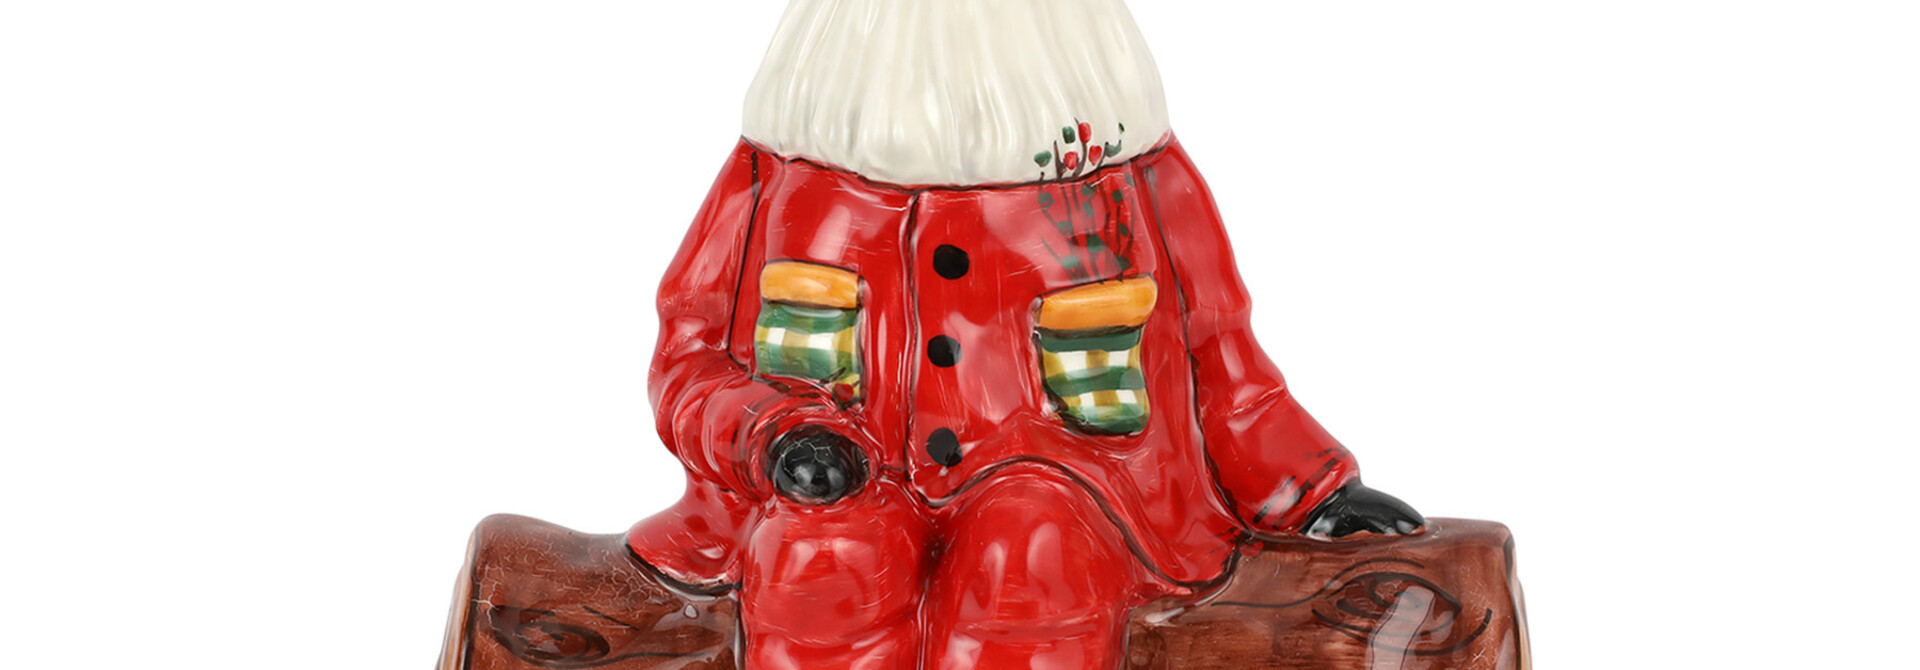 Old St. Nick | The Figural Collection, Babbo Natale - 11.75 Inch x 6.5 Inch x 12.5 Inch